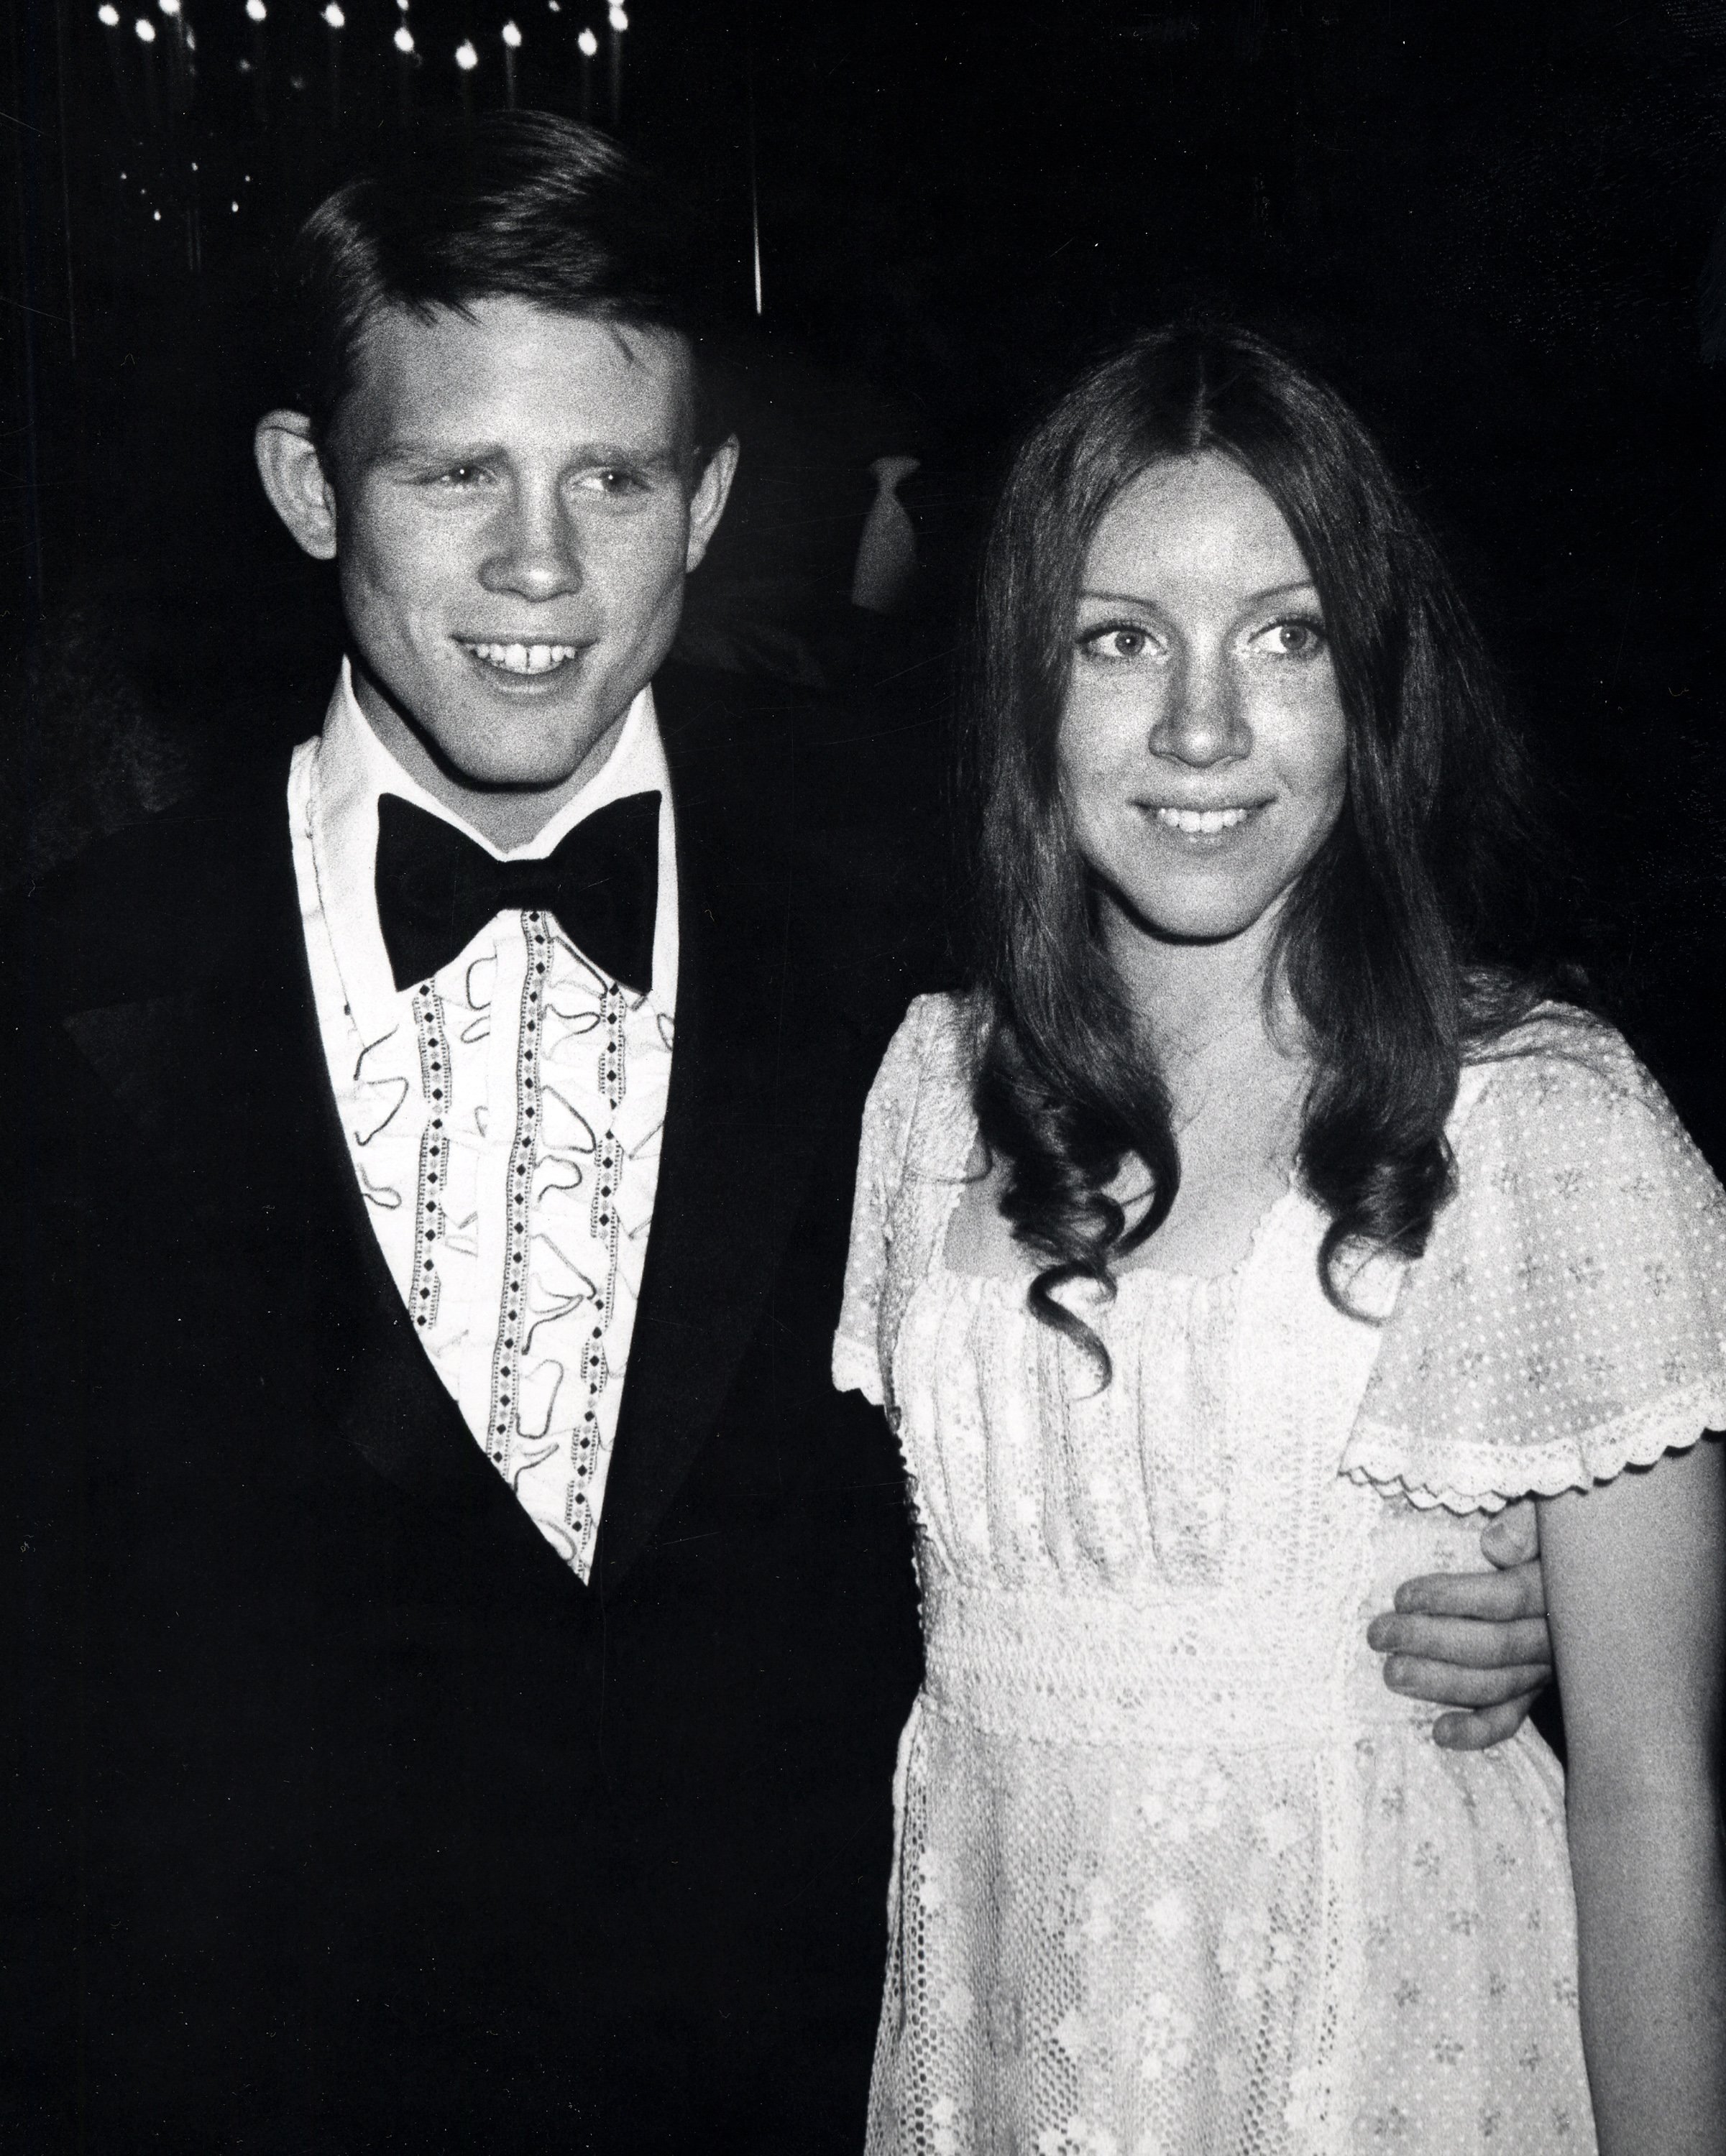 Ron Howard and Cheryl at "Salute to Jack Benny" on March 21, 1974 | Source: Getty Images